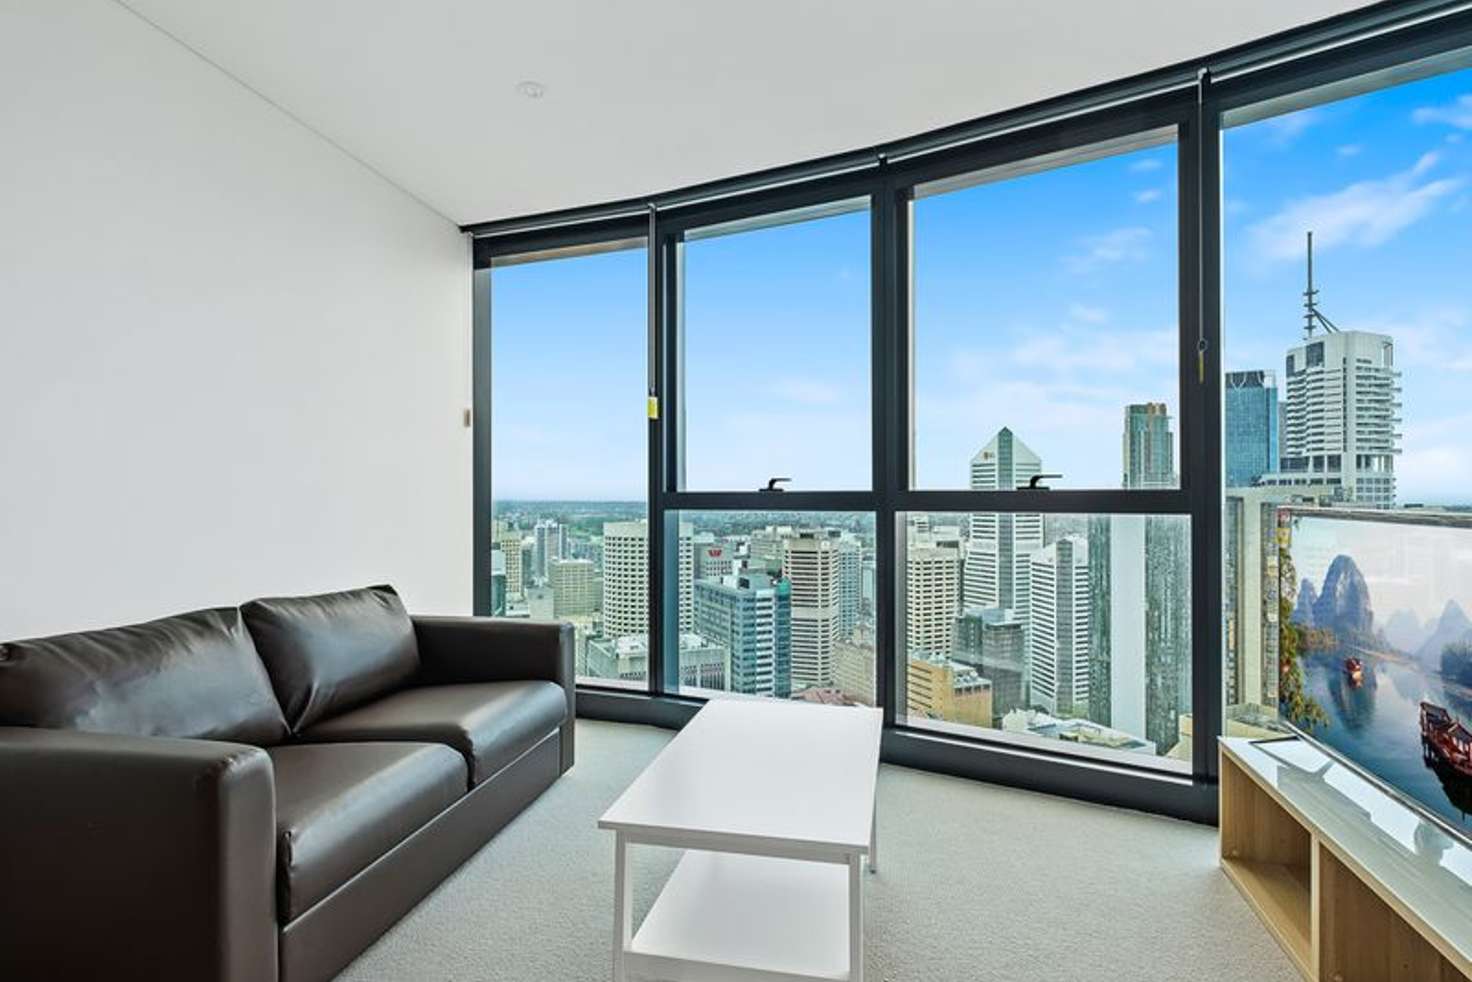 Main view of Homely apartment listing, 4509/222 Margaret Street, Brisbane City QLD 4000